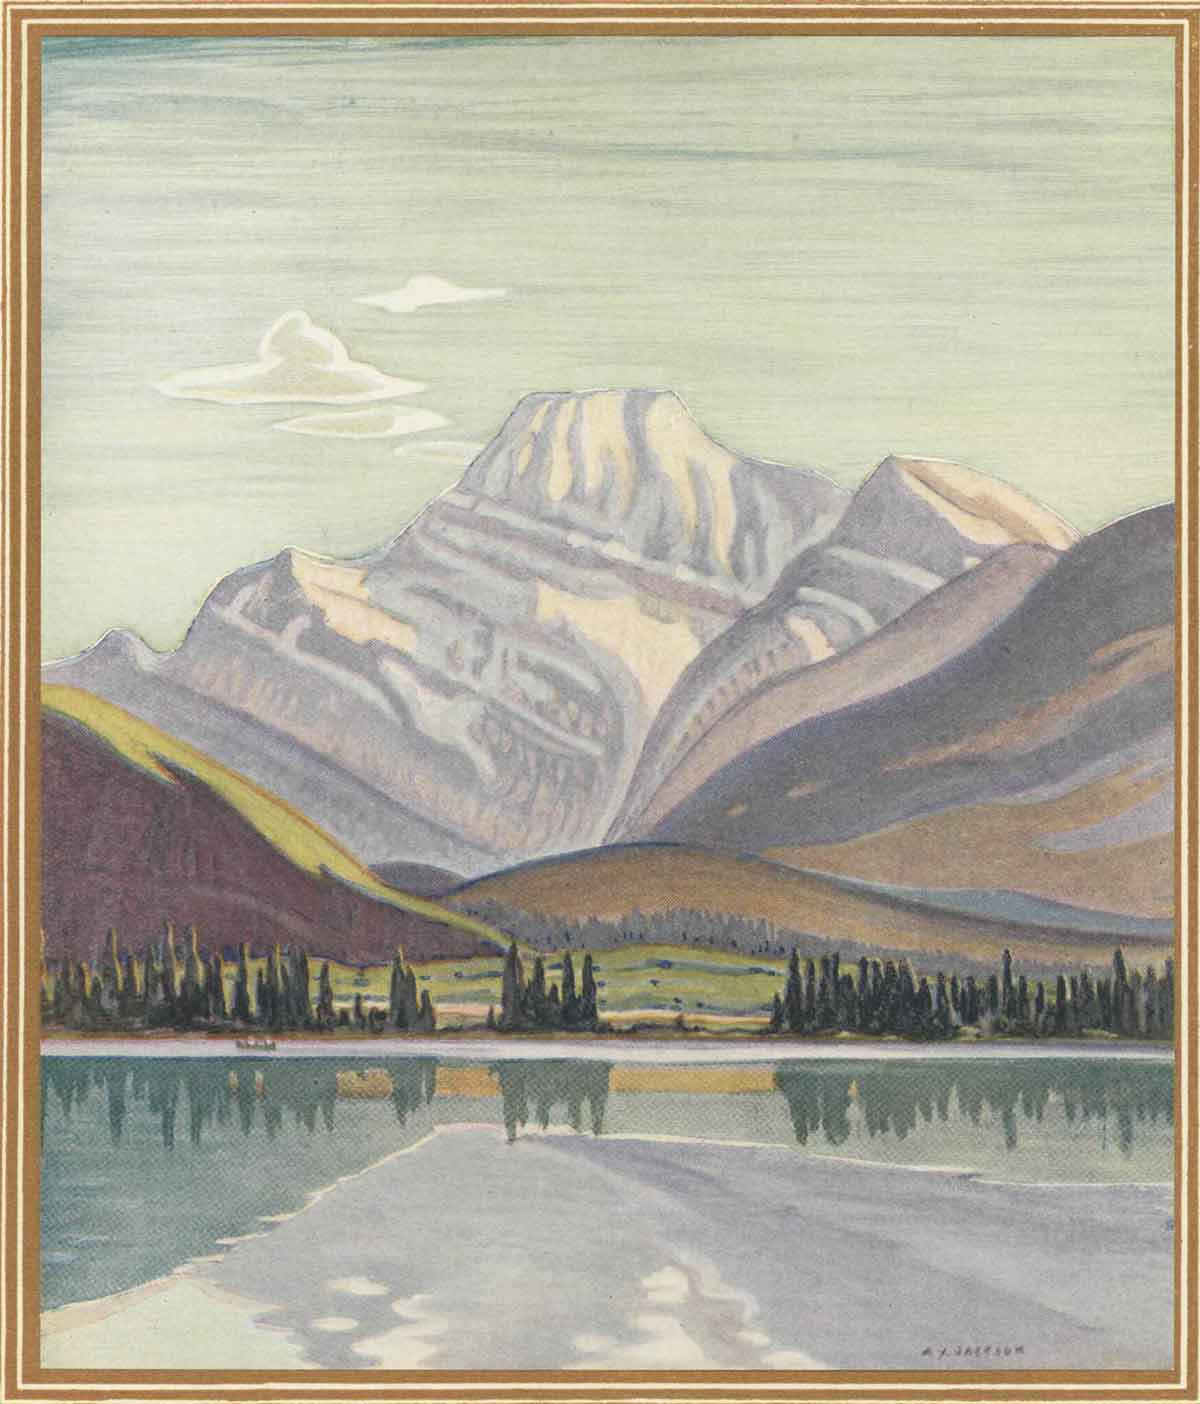 Mount Edith Cavell. A. Y. Jackson, 1927